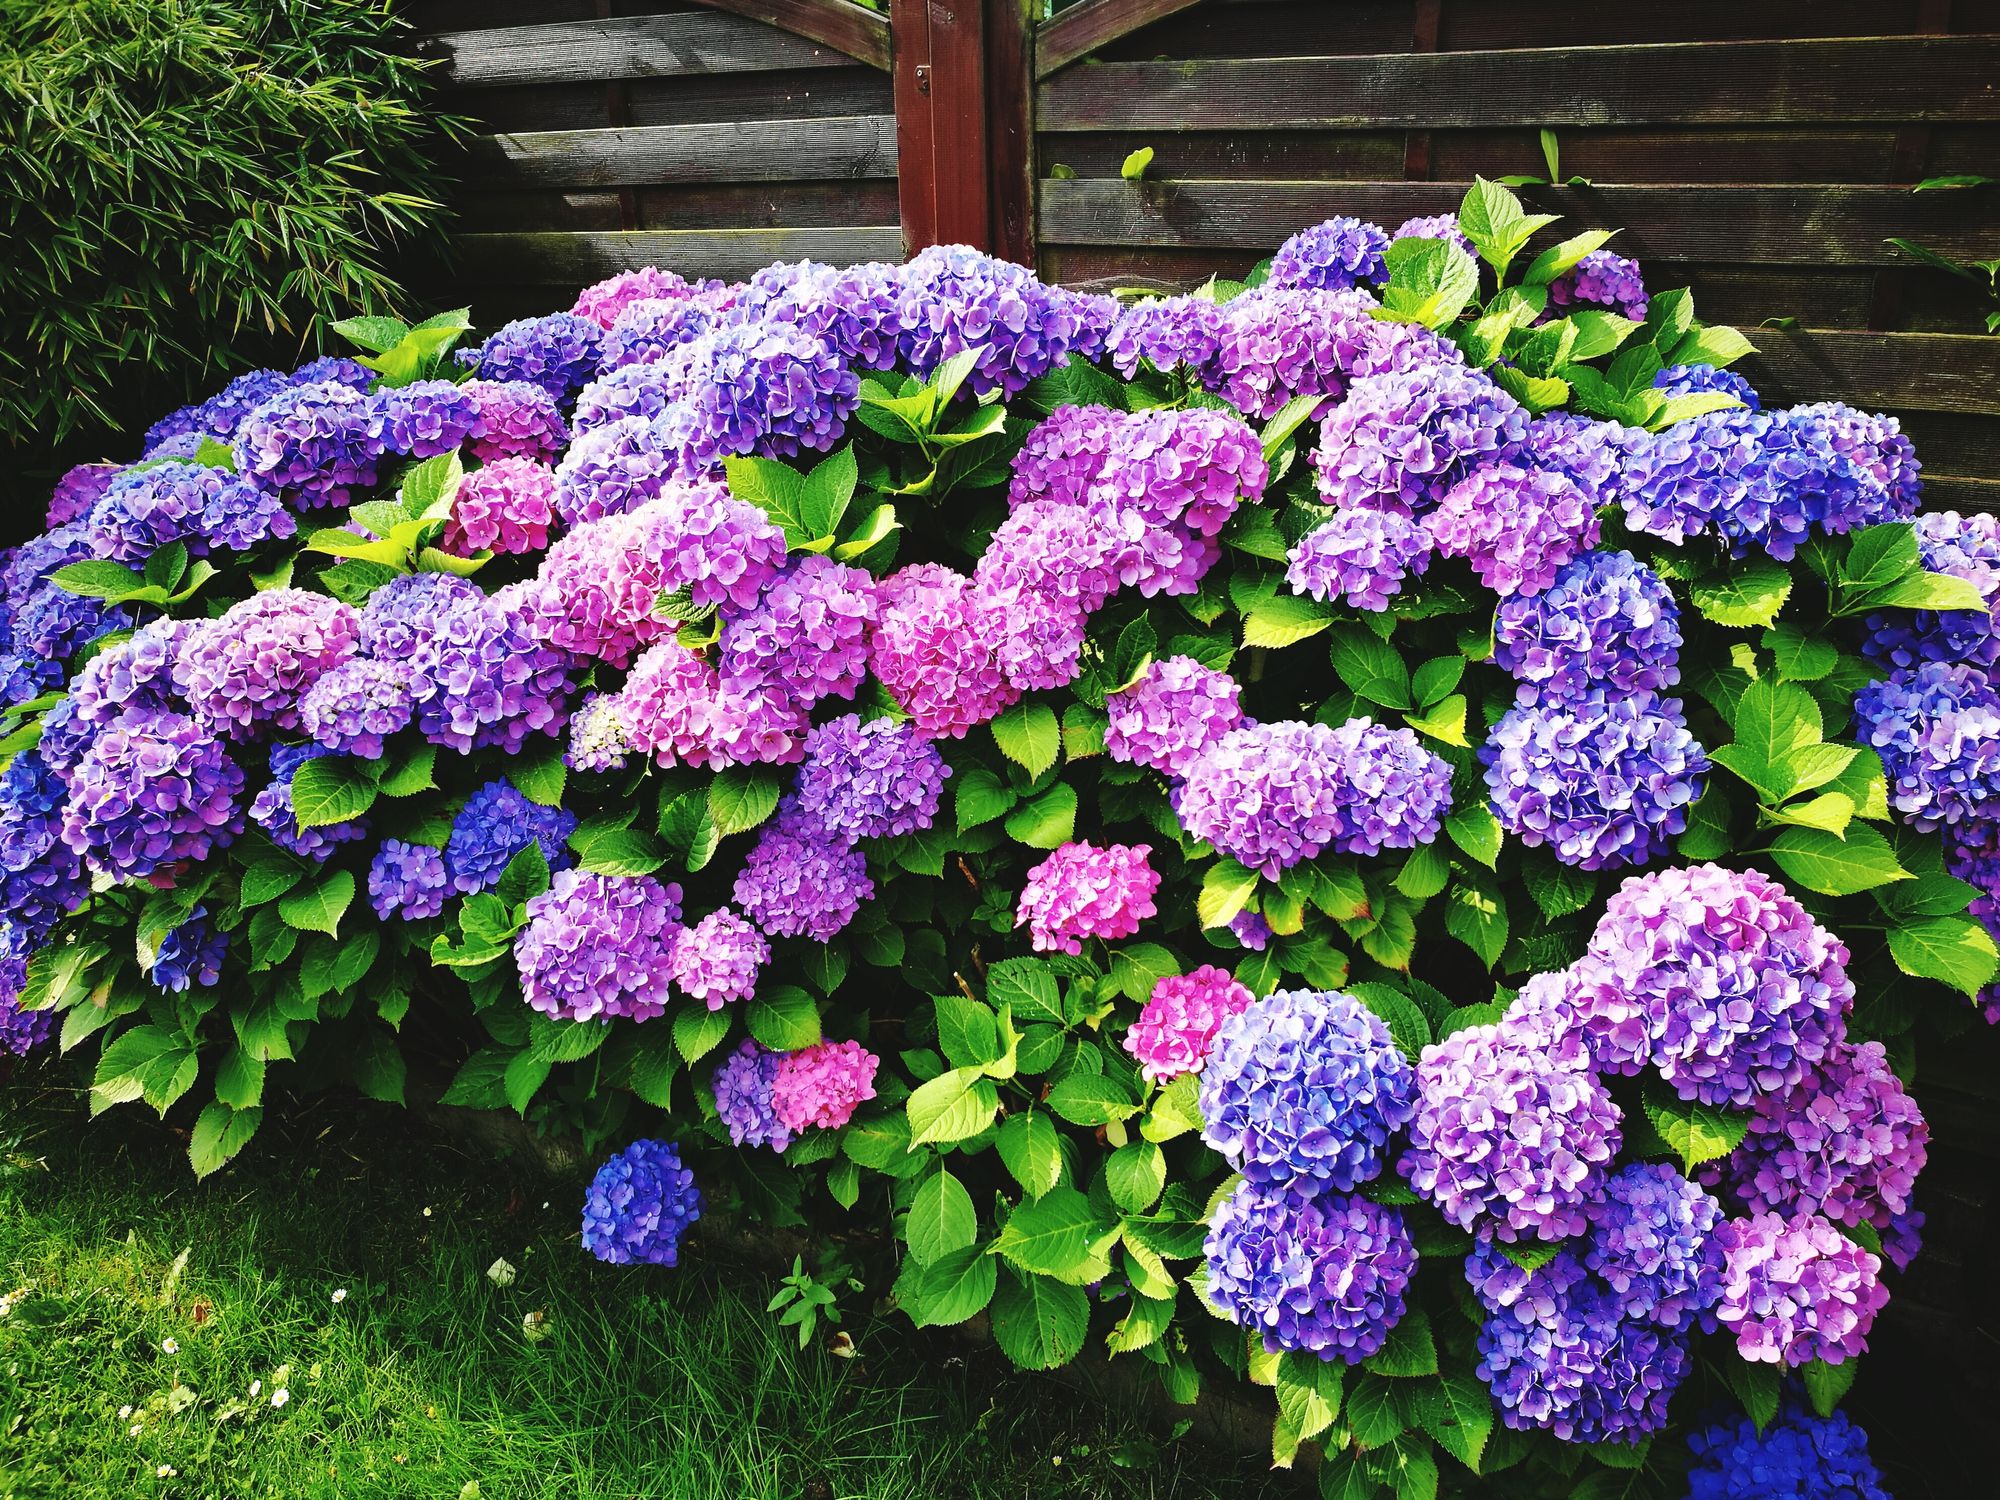 Image of Hydrangea plant with text saying "Hydrangea is poisonous"